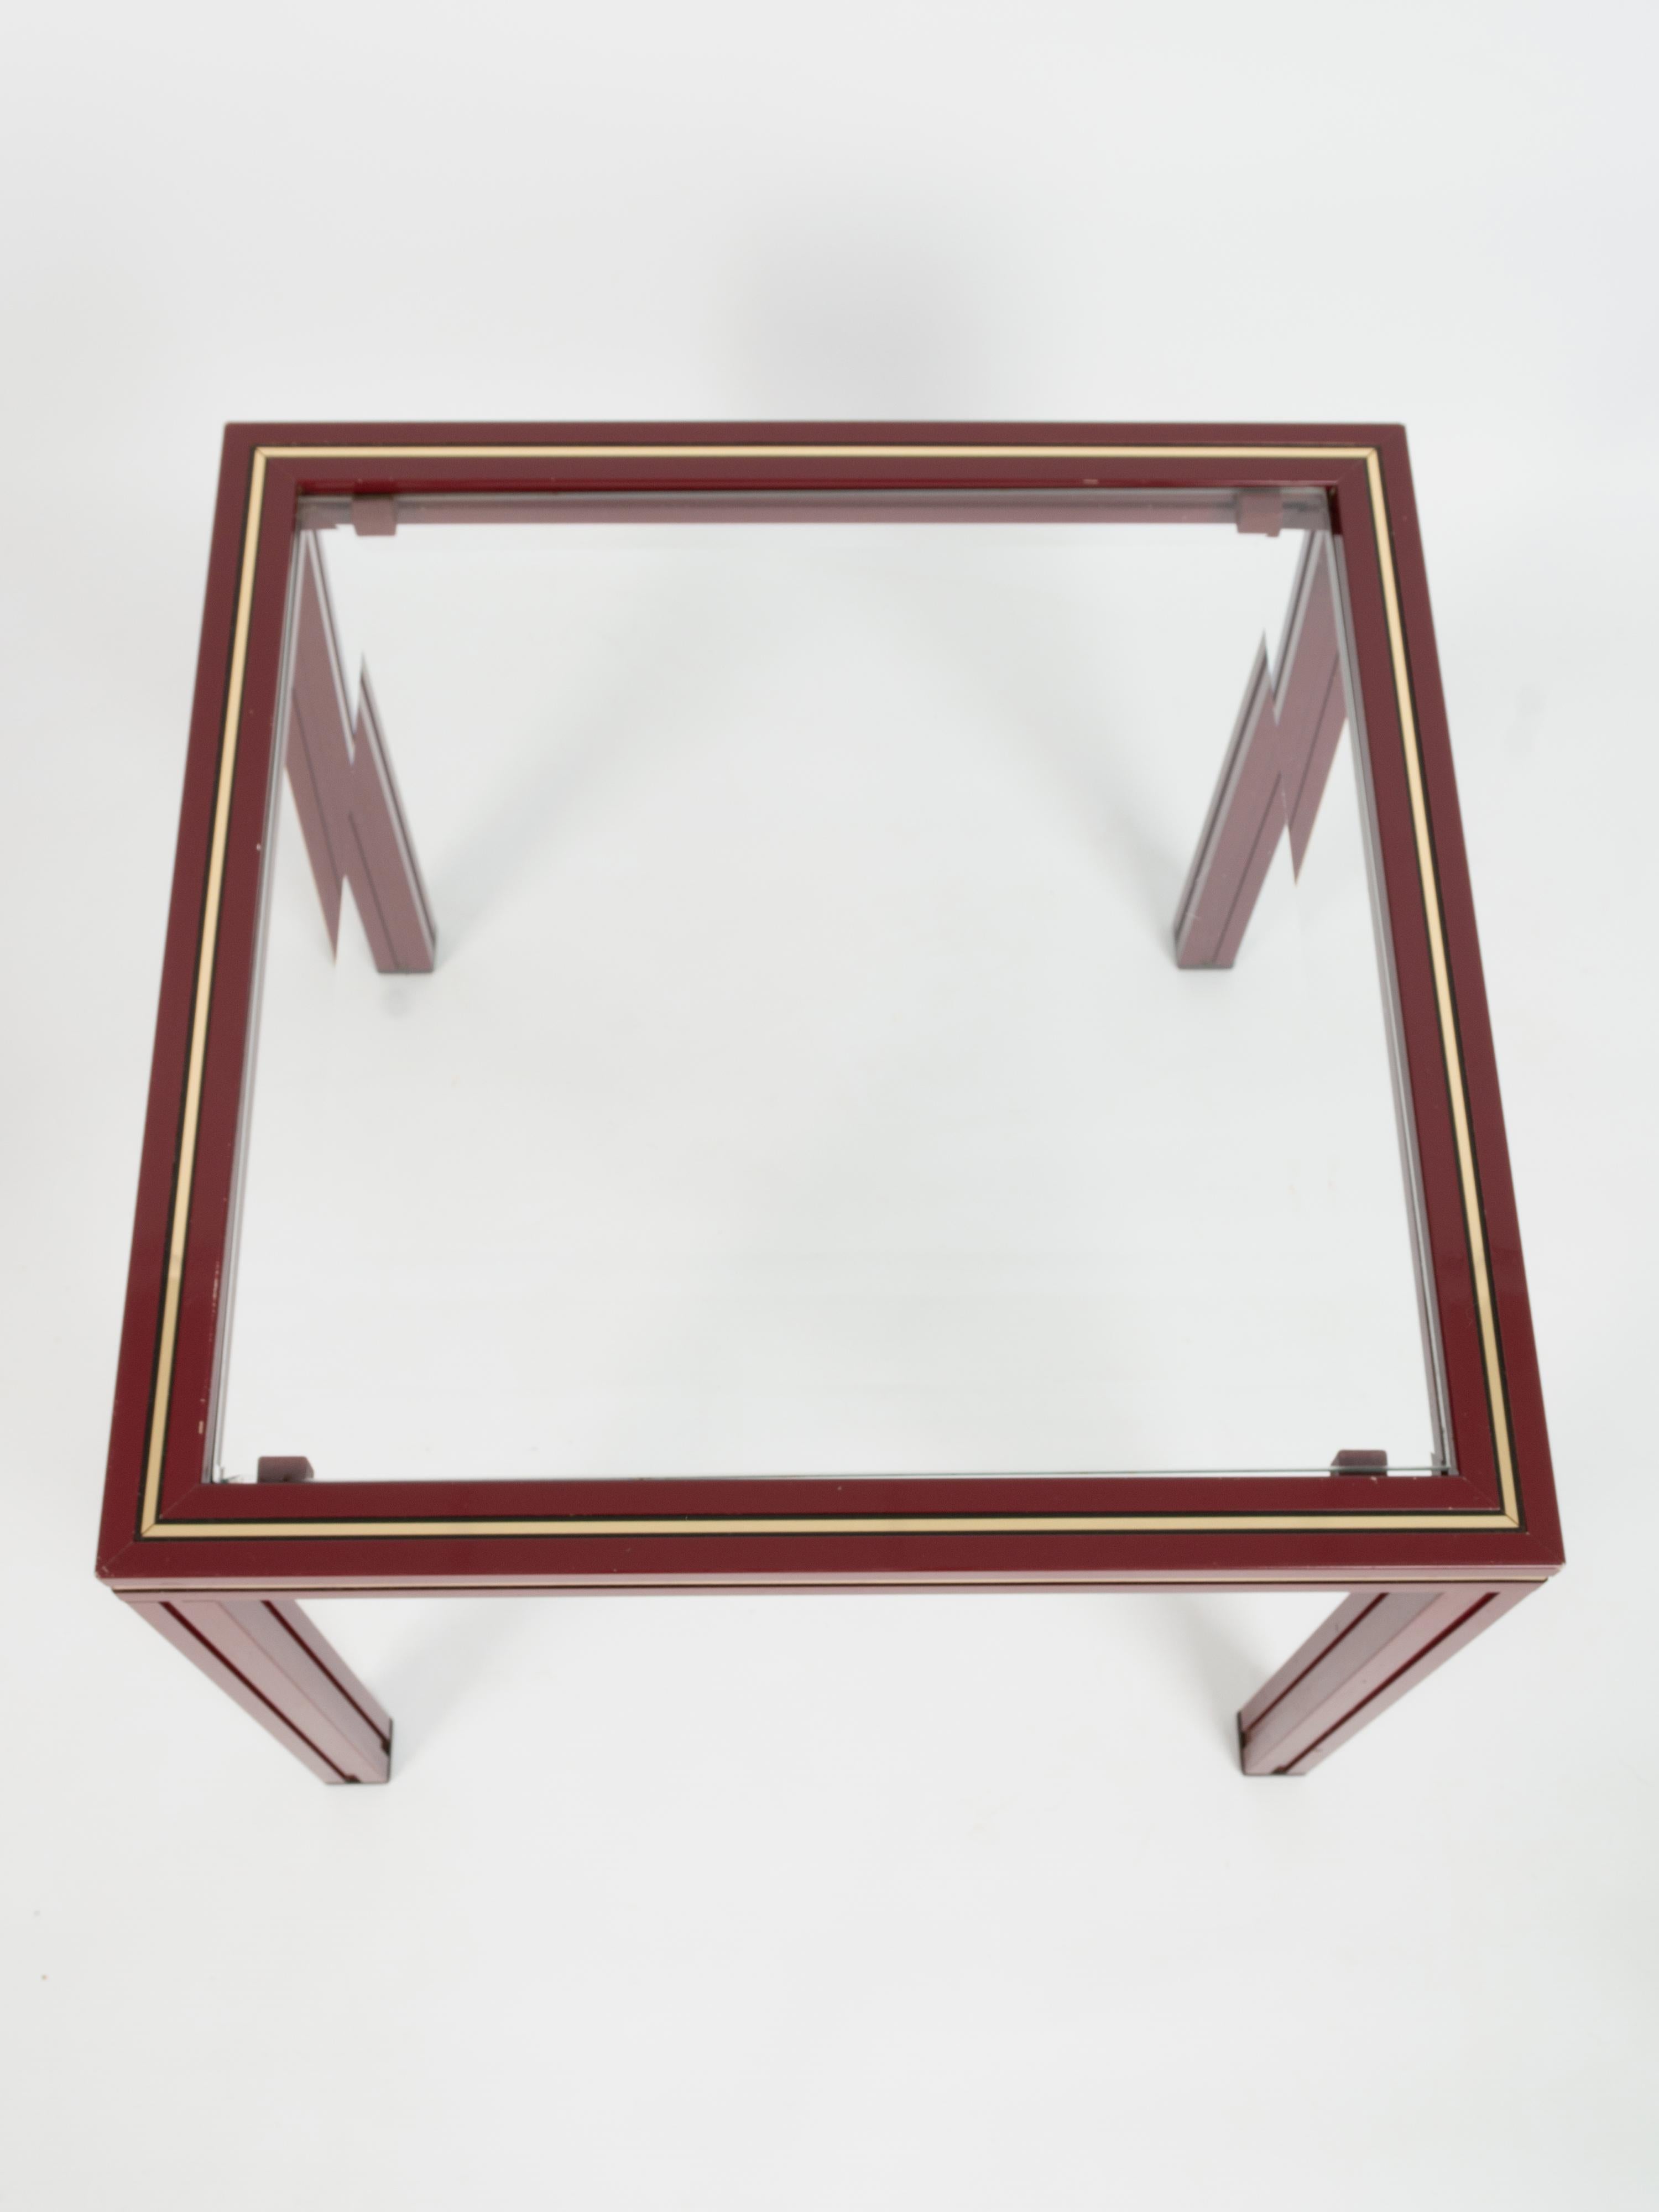 French 1970s Nesting Tables by Pierre Vandel, Paris For Sale 8